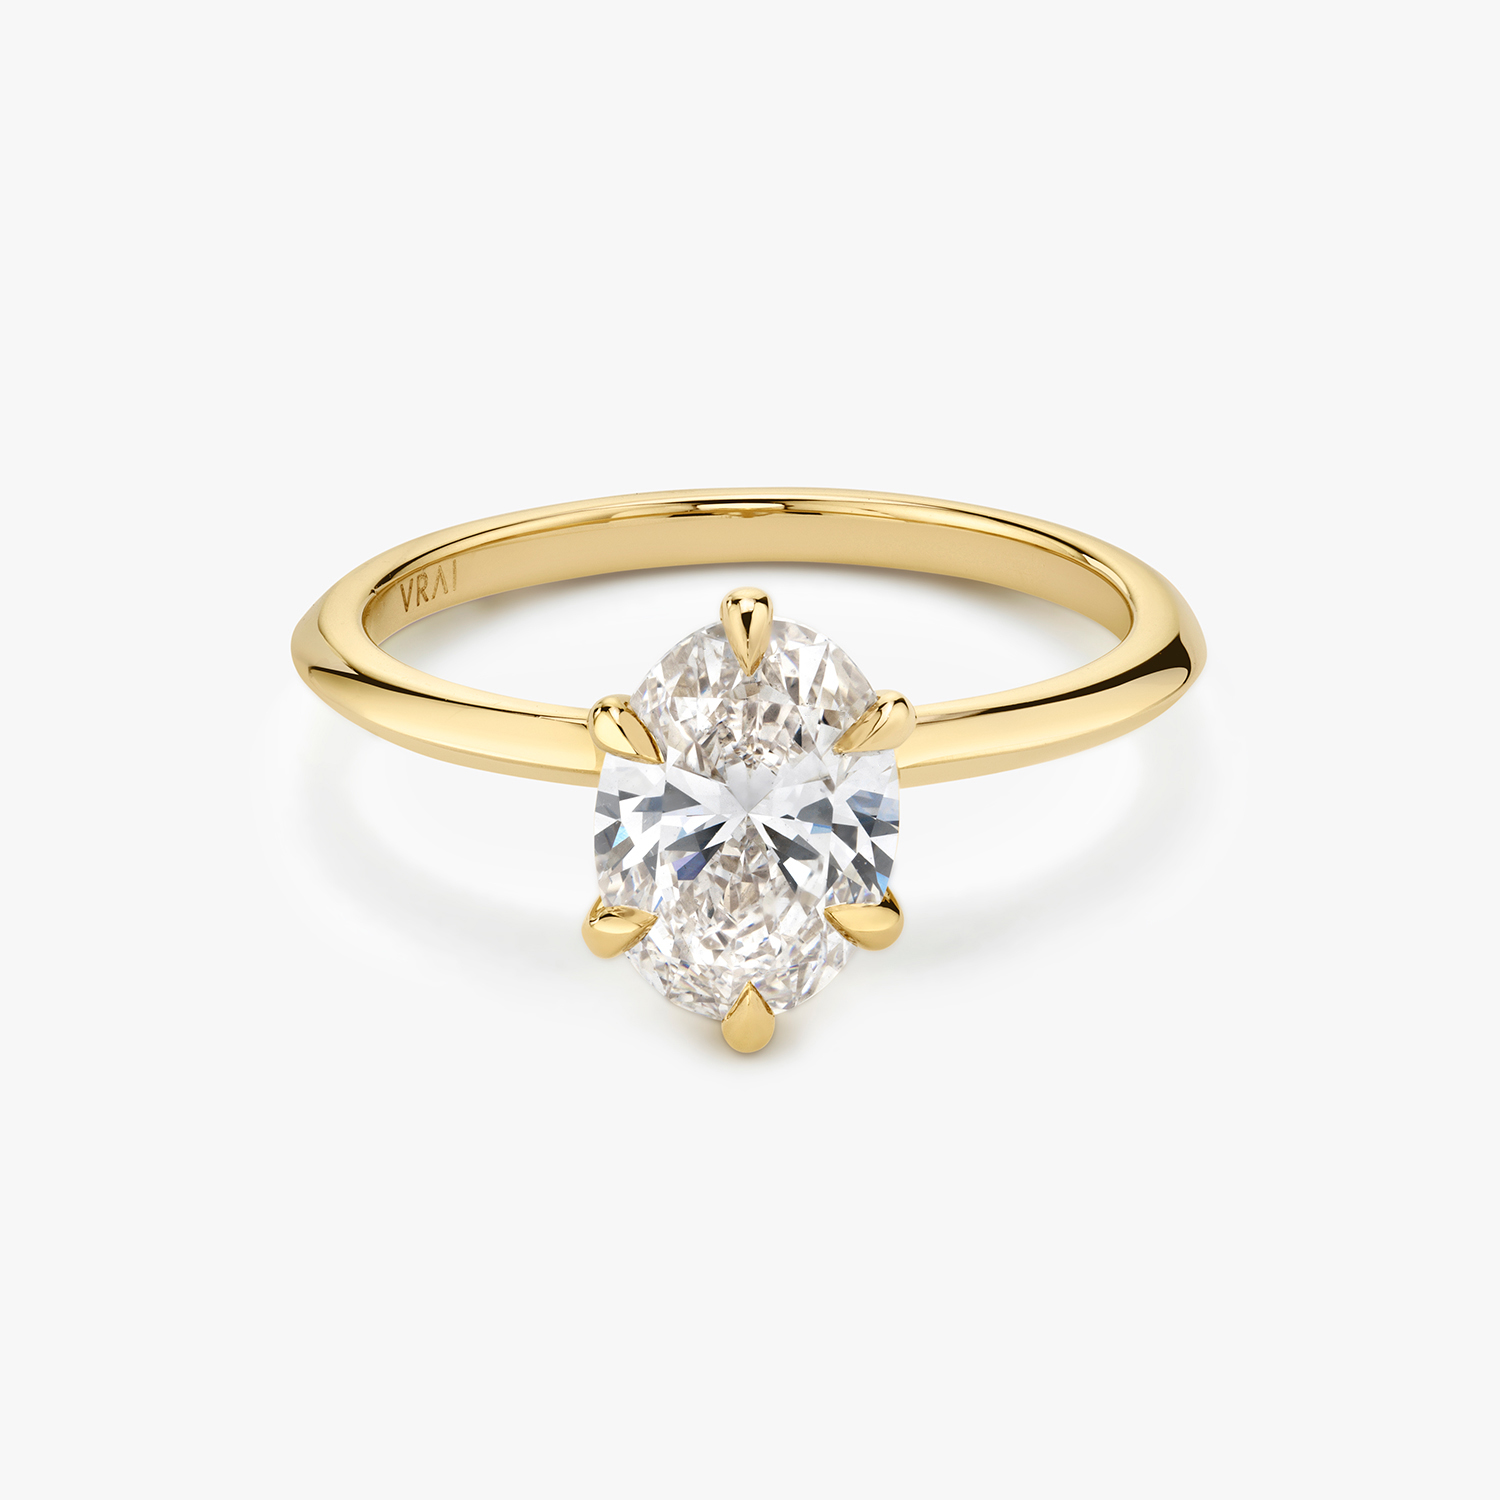 3 Carat Oval Diamond Rings: A Shopping And Styling Guide | Vrai Created  Diamonds